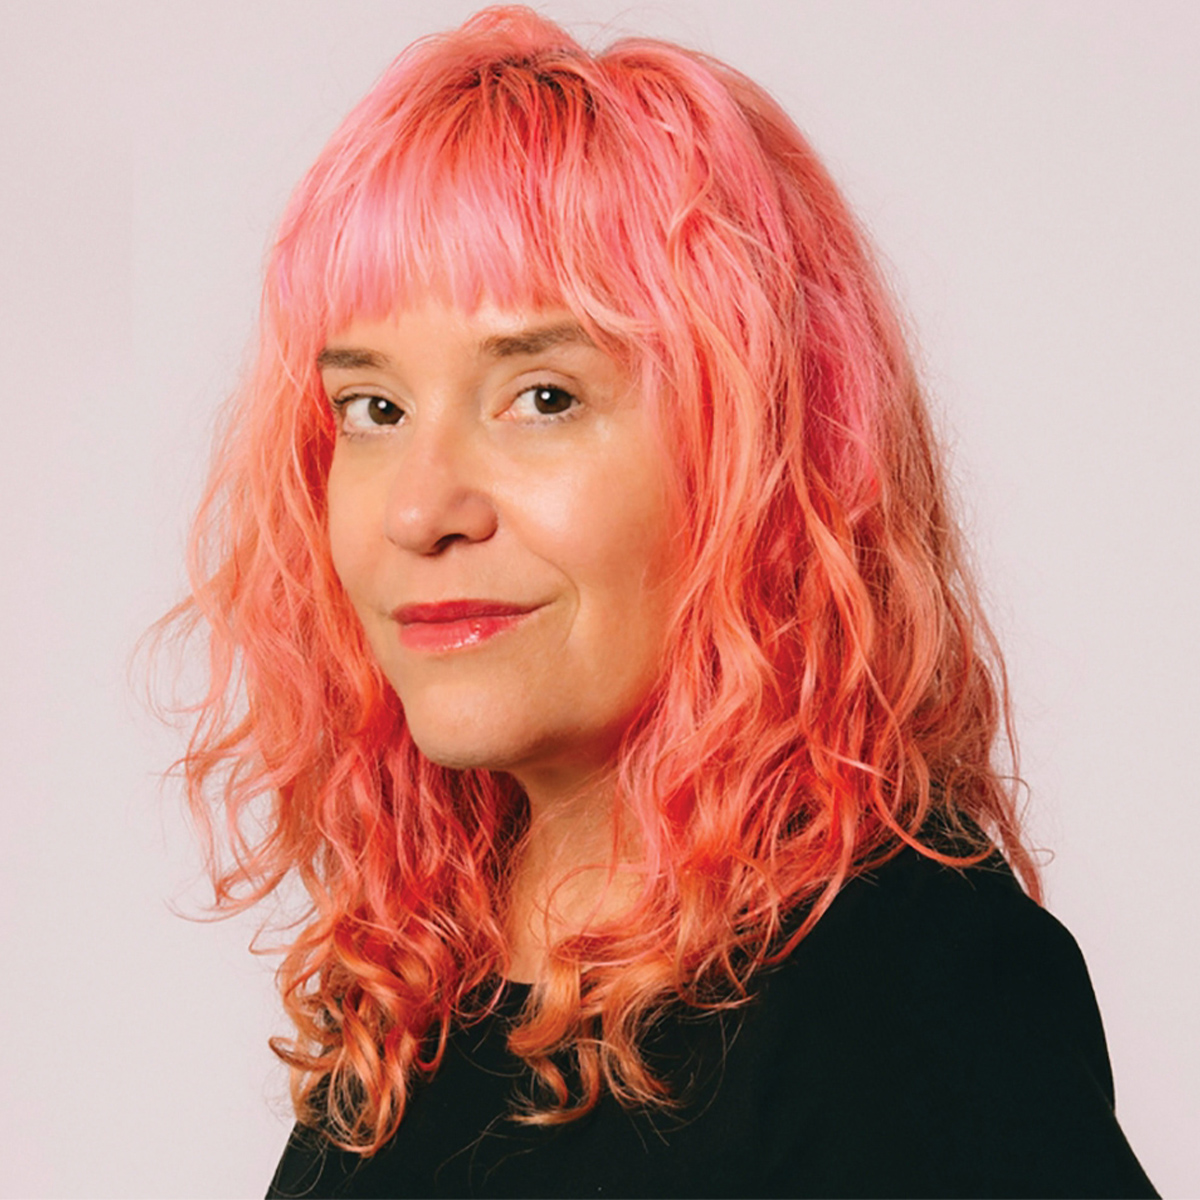 Michelle Tea color portrait. Michelle is smiling and posed against a neutral background. Michelle has soft pink wavy hair and is wearing a dark-colored top. 